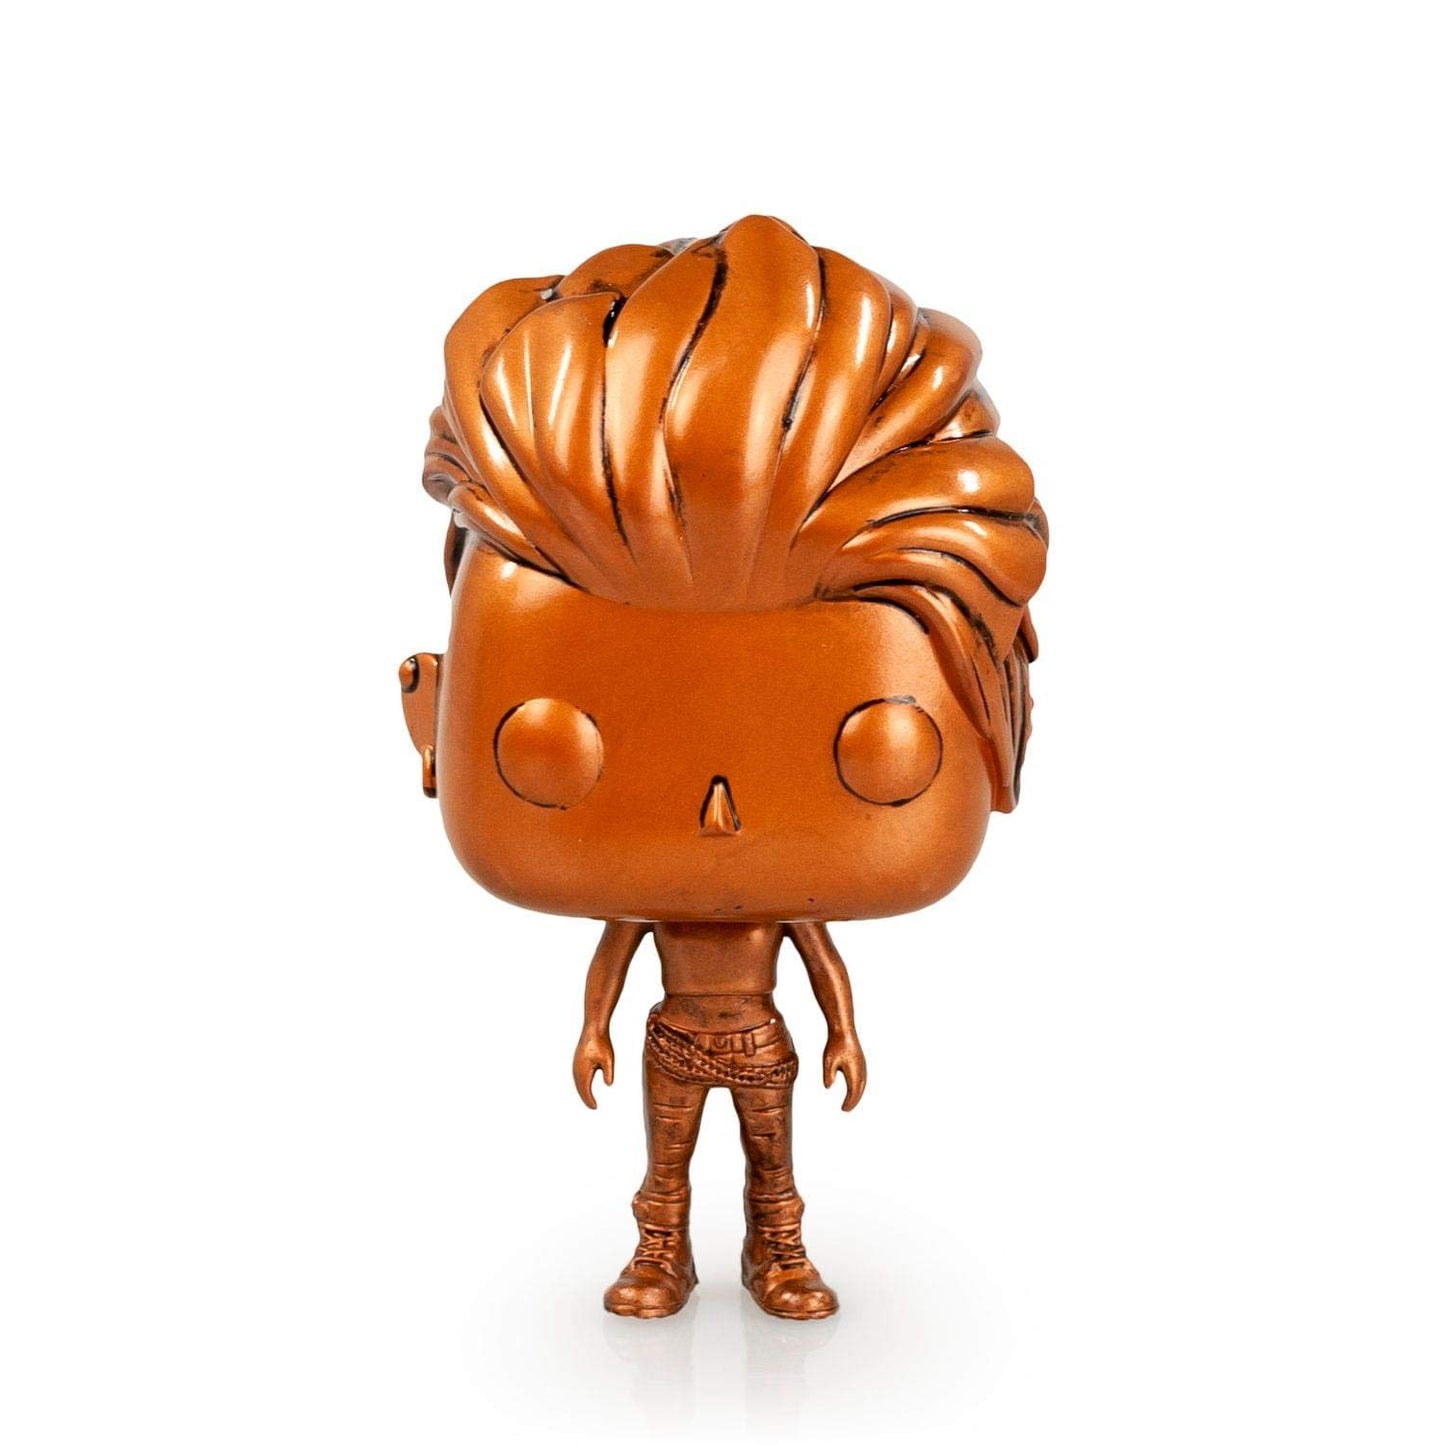 Funko POP! Movies: Ready Player One - Art3mis (Copper) Exclusive